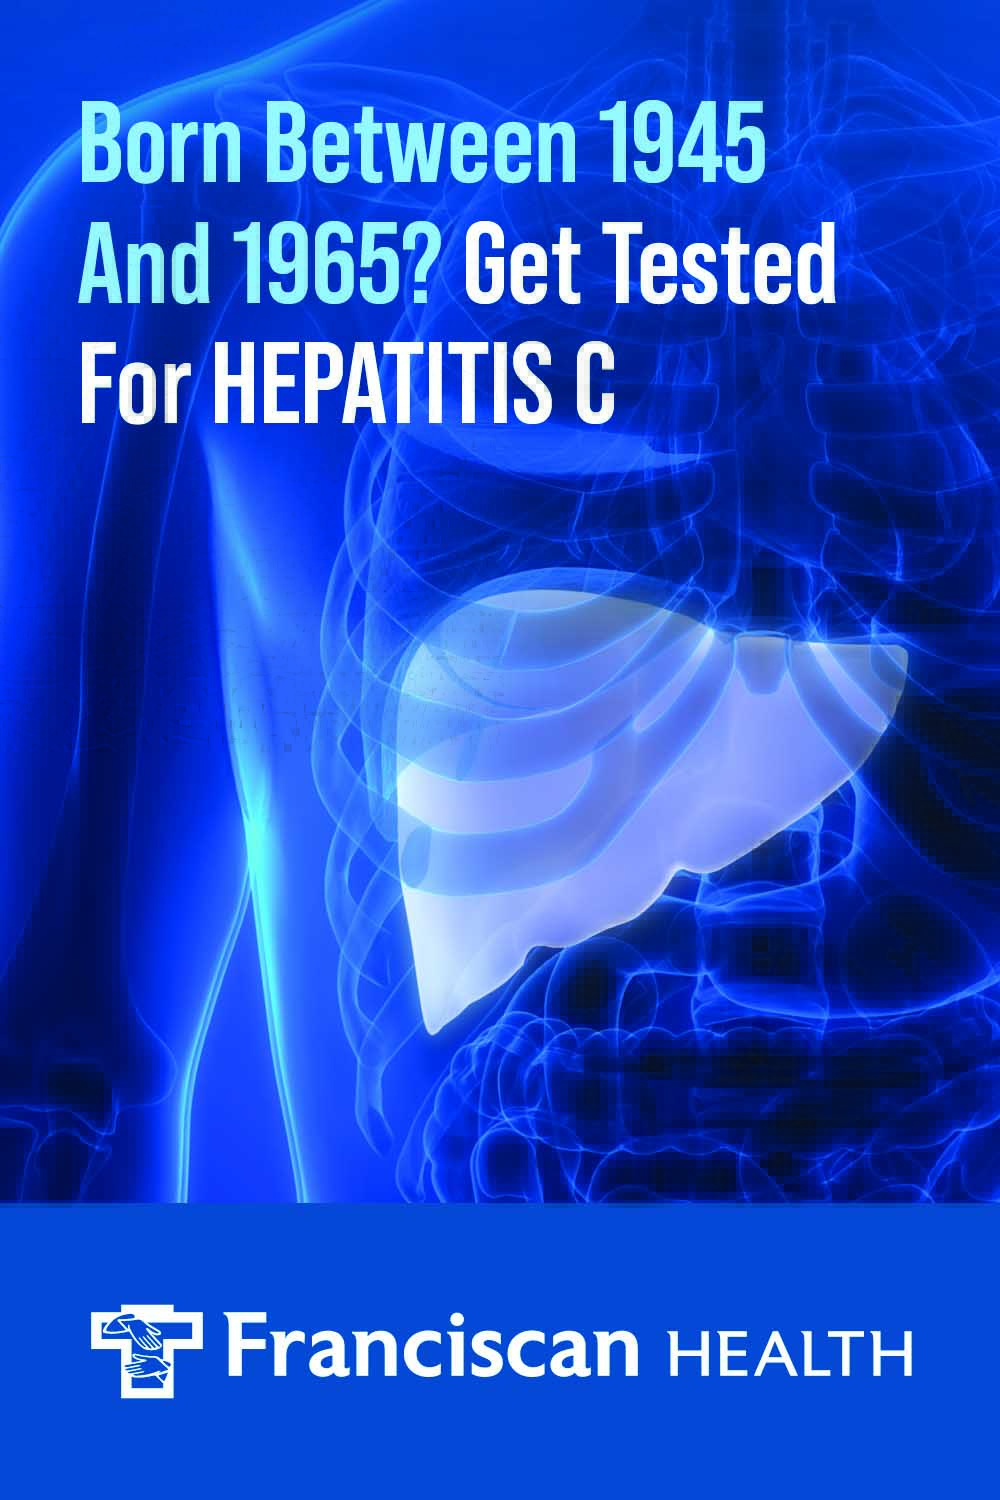 Born Between 1945 and 1965? Get Tested for Hepatitis C